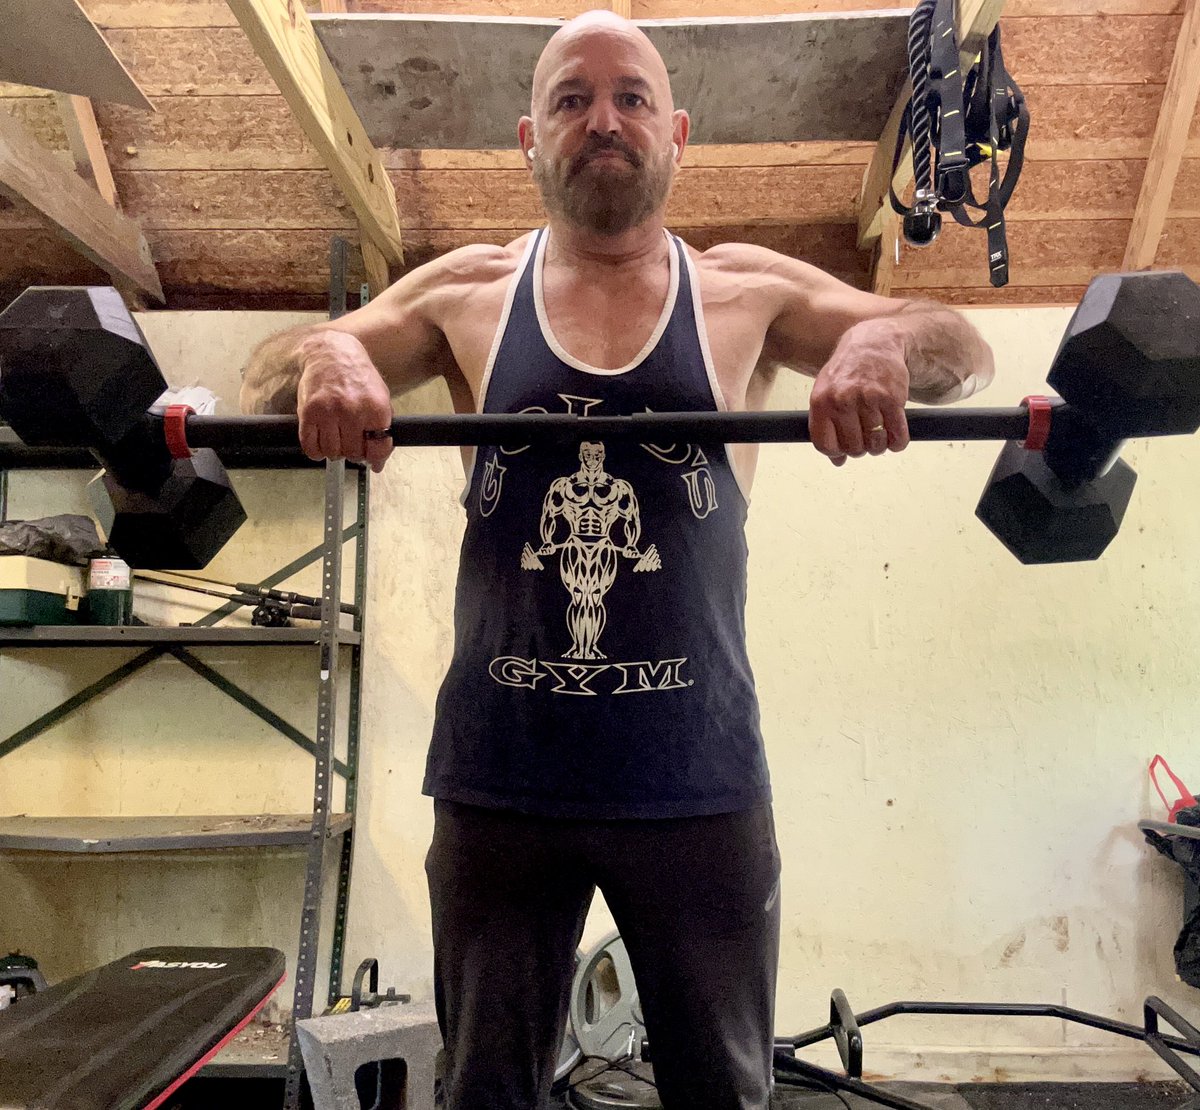 Got in a good after-work shoulder session in the woodshed. Feeling a little weighed down with all the medical stuff, but faith & fitness are helping me to keep my balance. #oldmanfitness #cancersurvivor